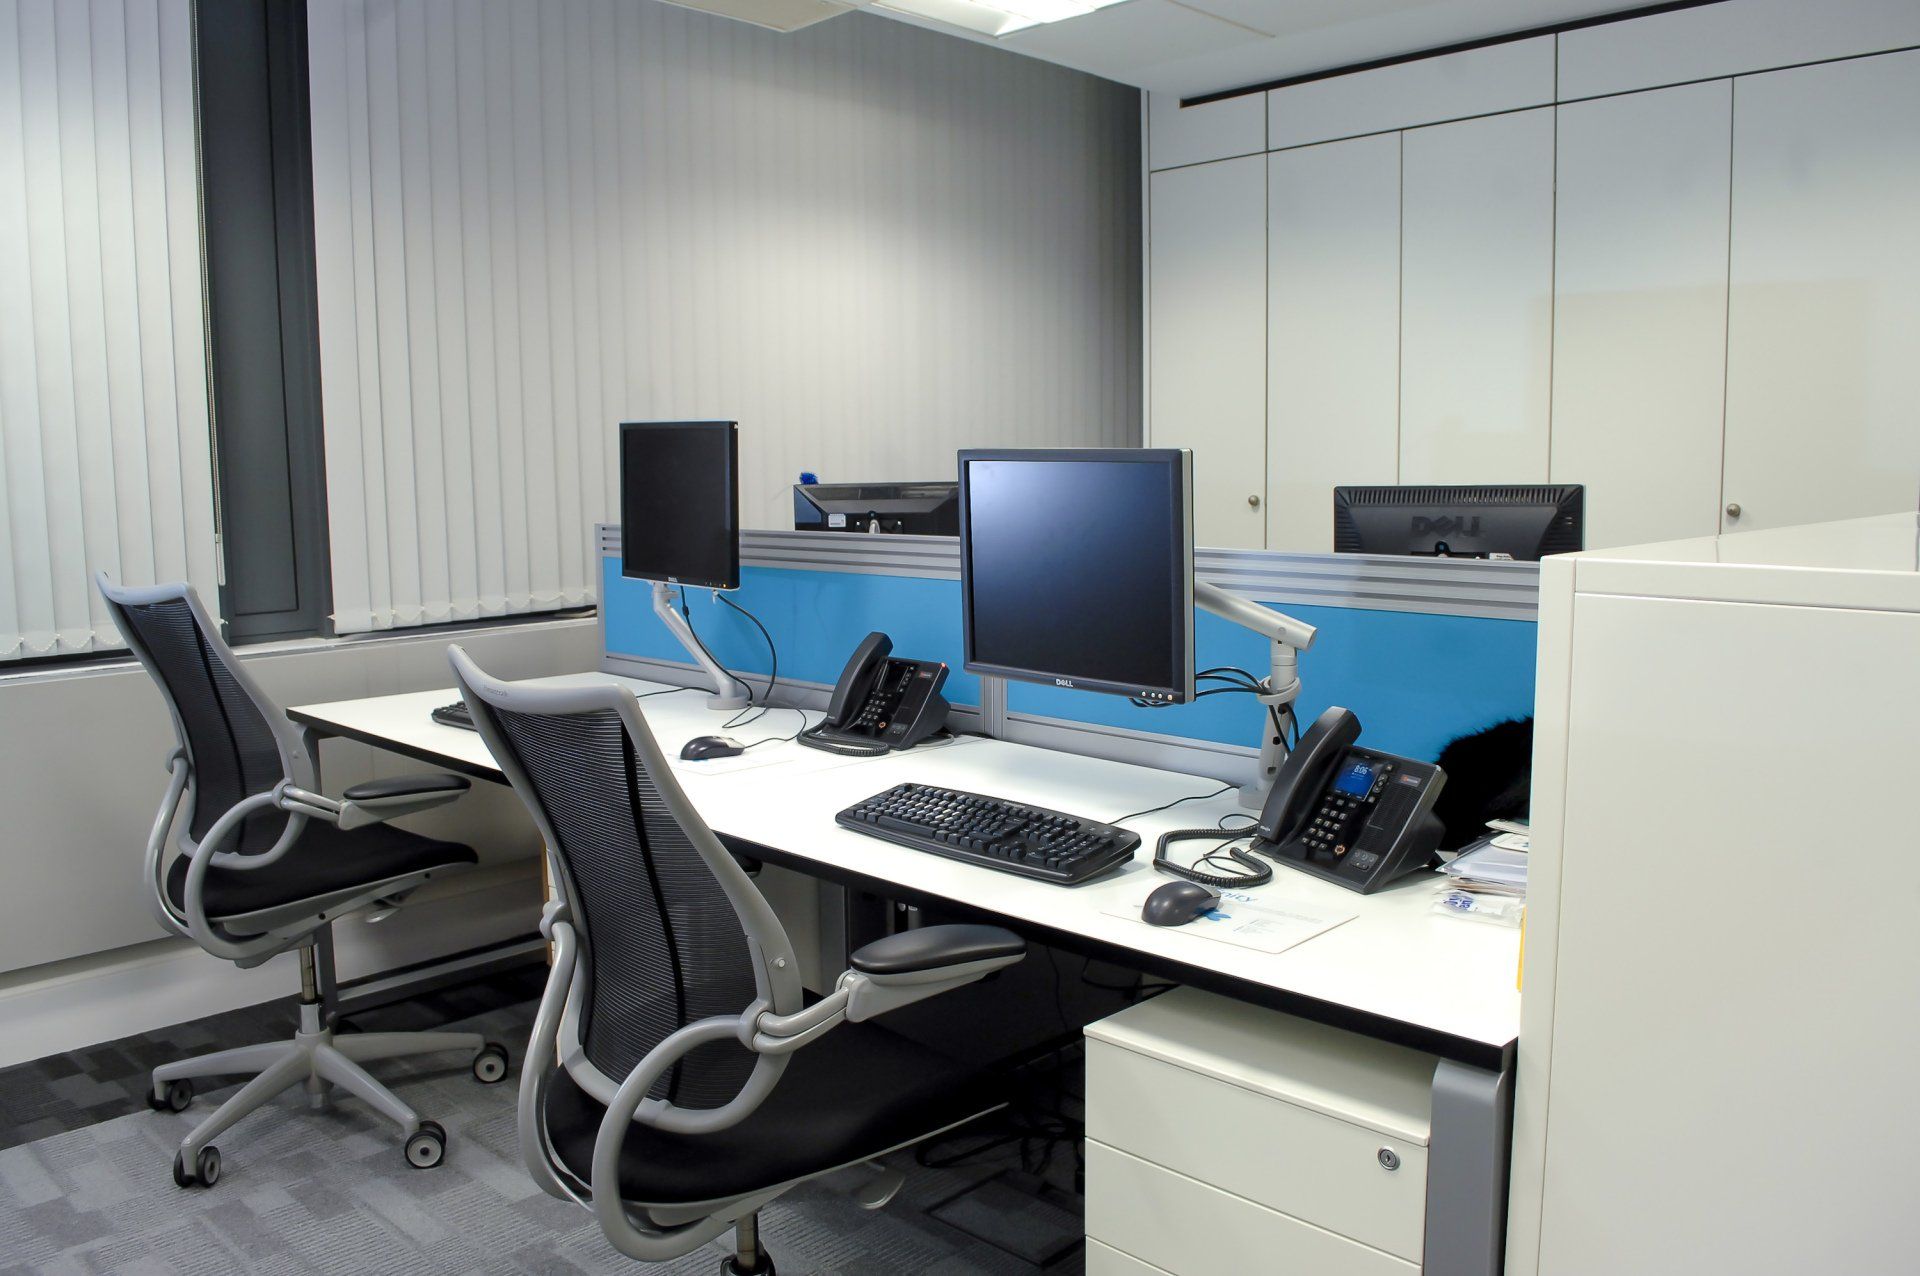 A row of desks with computers and chairs in an office